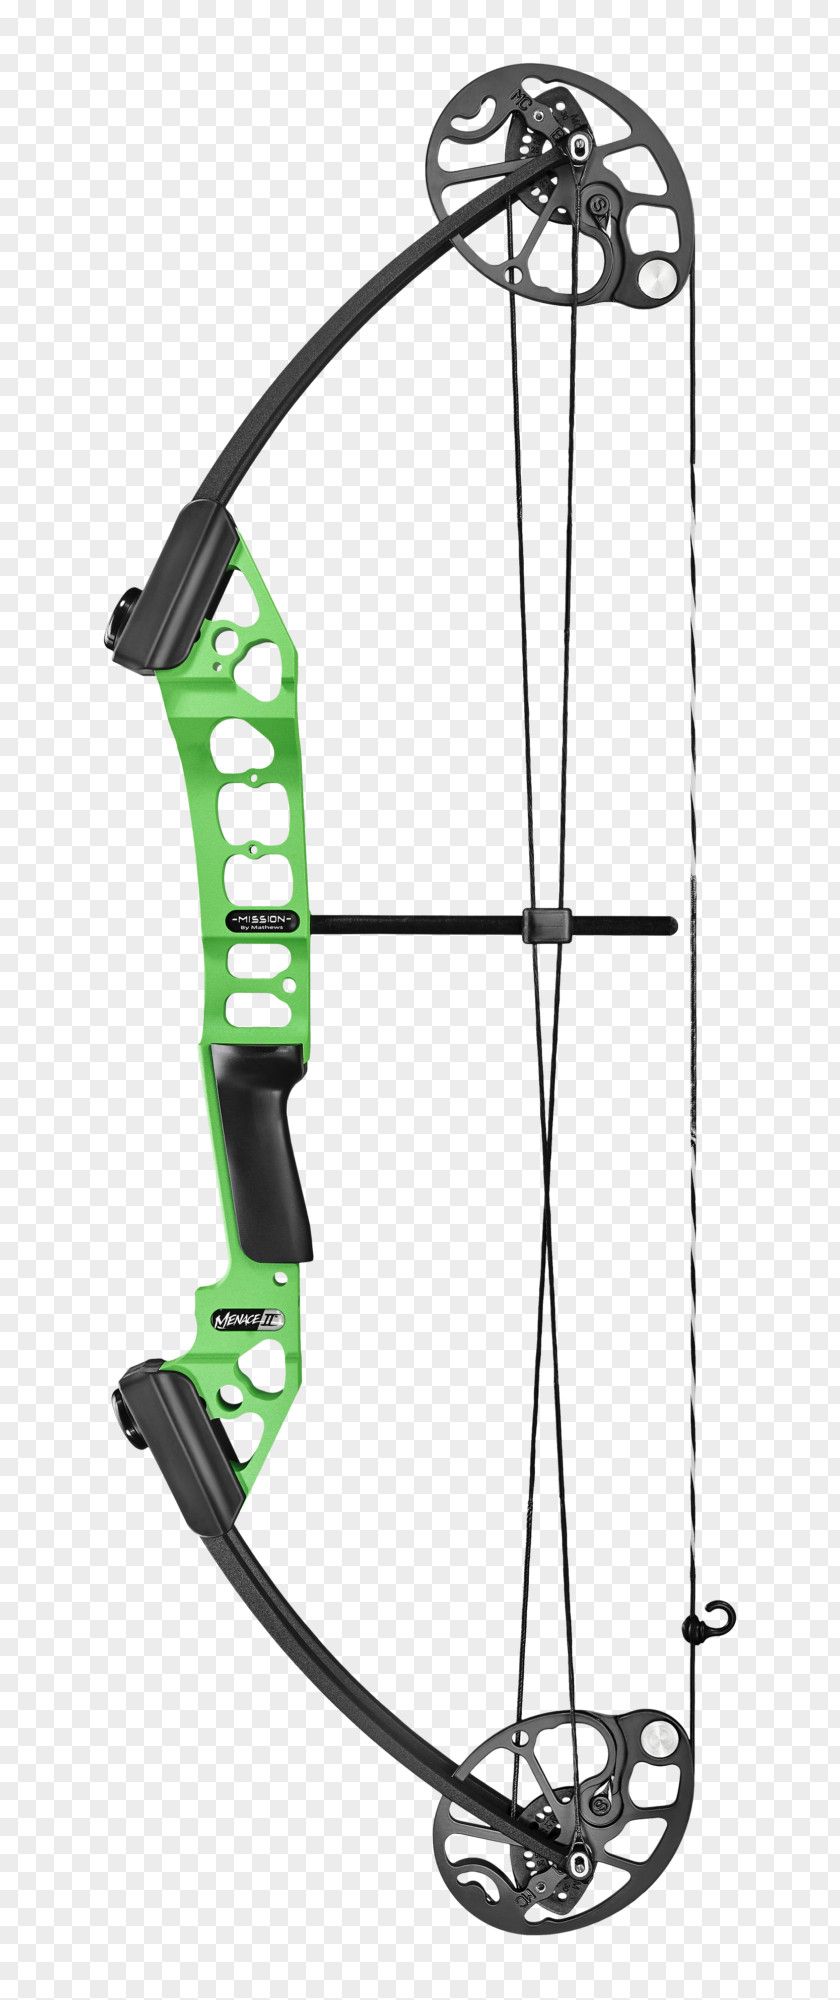 Scott Archery Compound Bows Bow And Arrow Hunting Recurve PNG